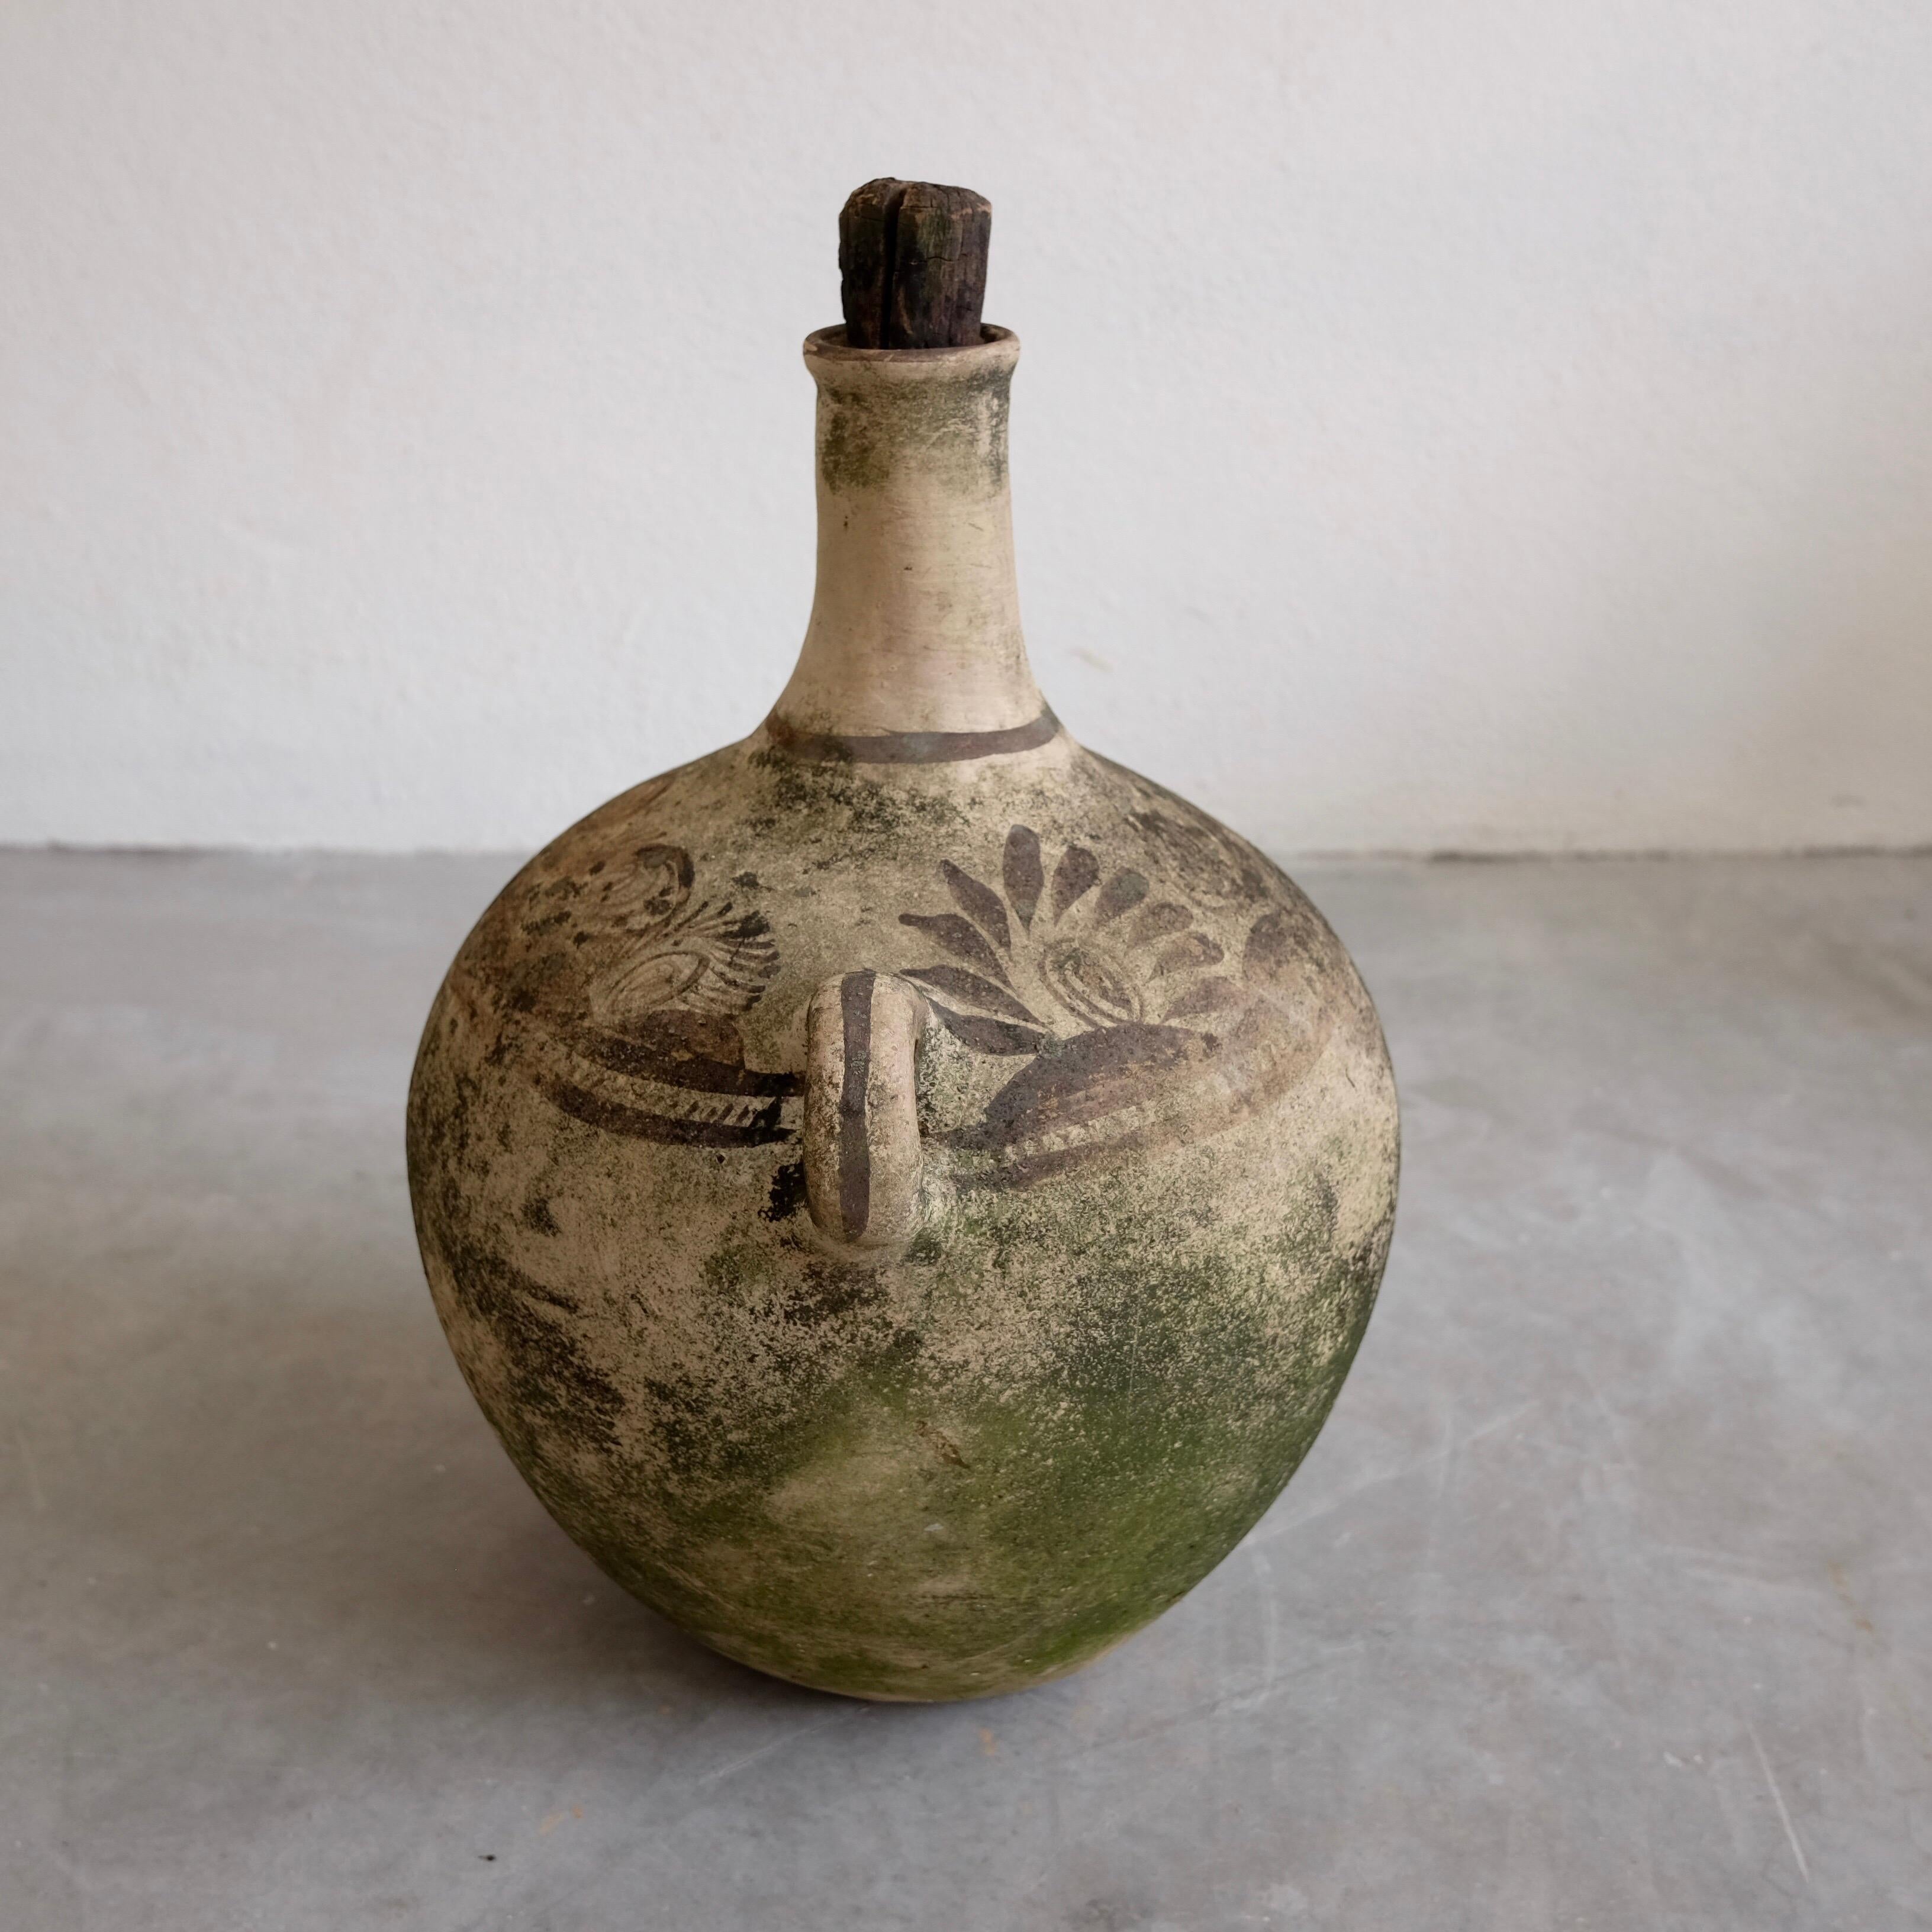 Long-neck vessel from Chililico, Hidalgo with original wood stopper. The jug has been lightly washed and what remains is the moss as seen in the photos. The pot was painted using a natural earth dye and feathers. The piece is a nice representation